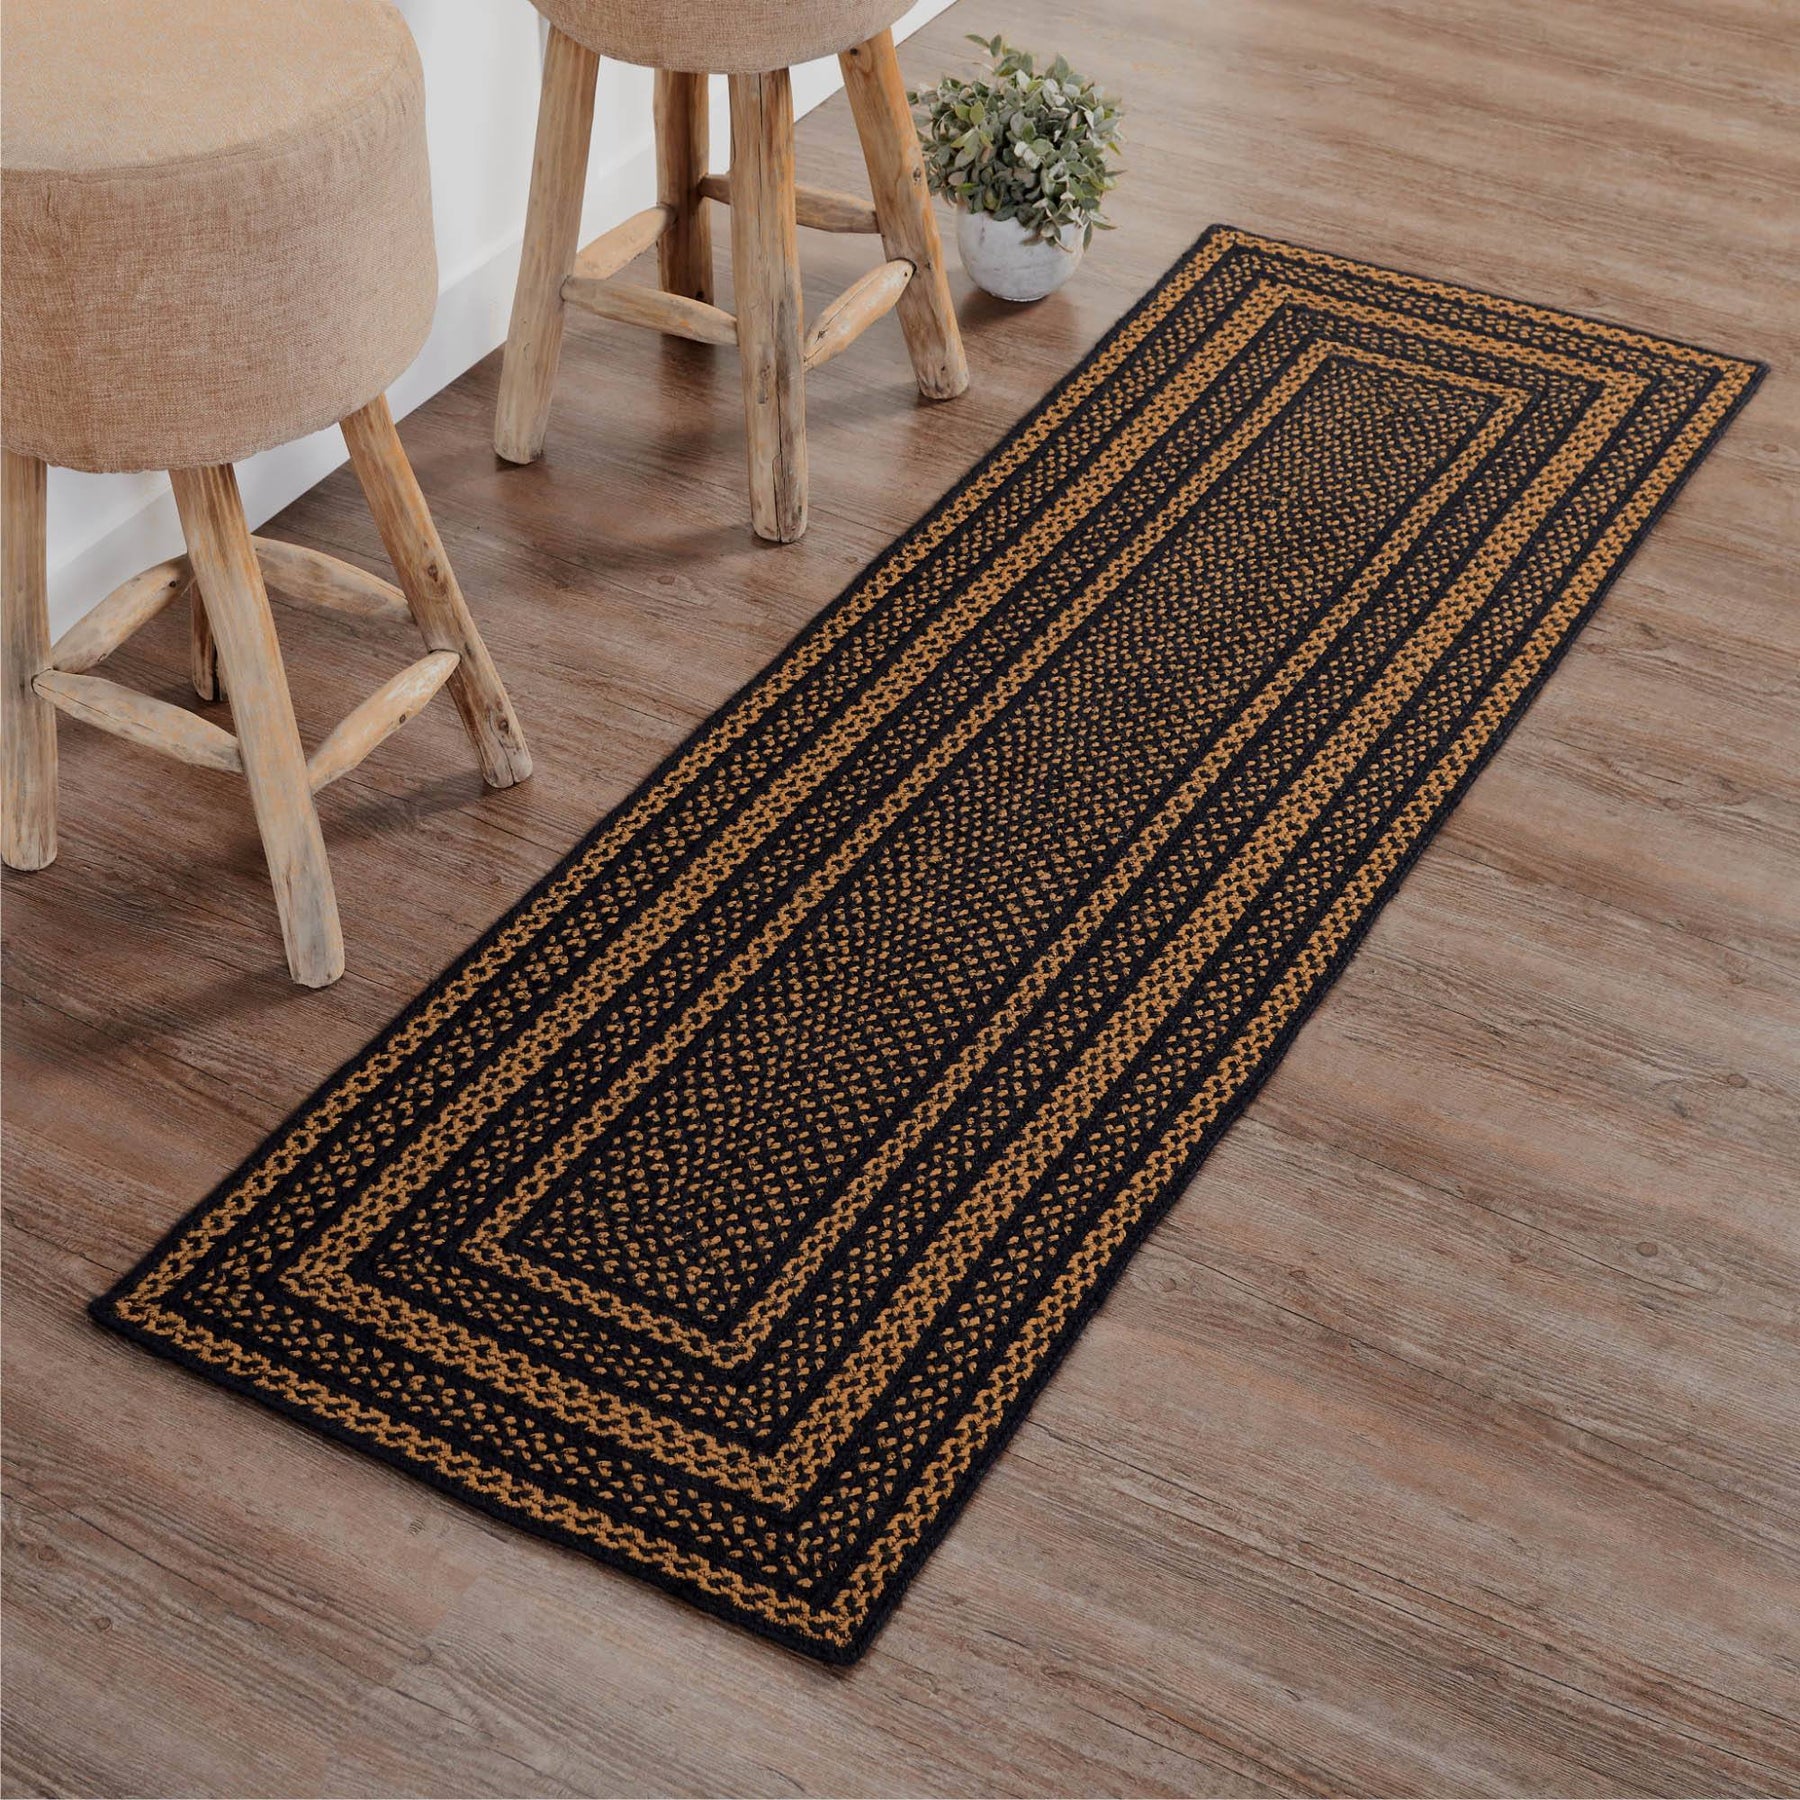 Farmhouse Black and Tan Rectangle Braided Rug 24x78 Runner - with Pad